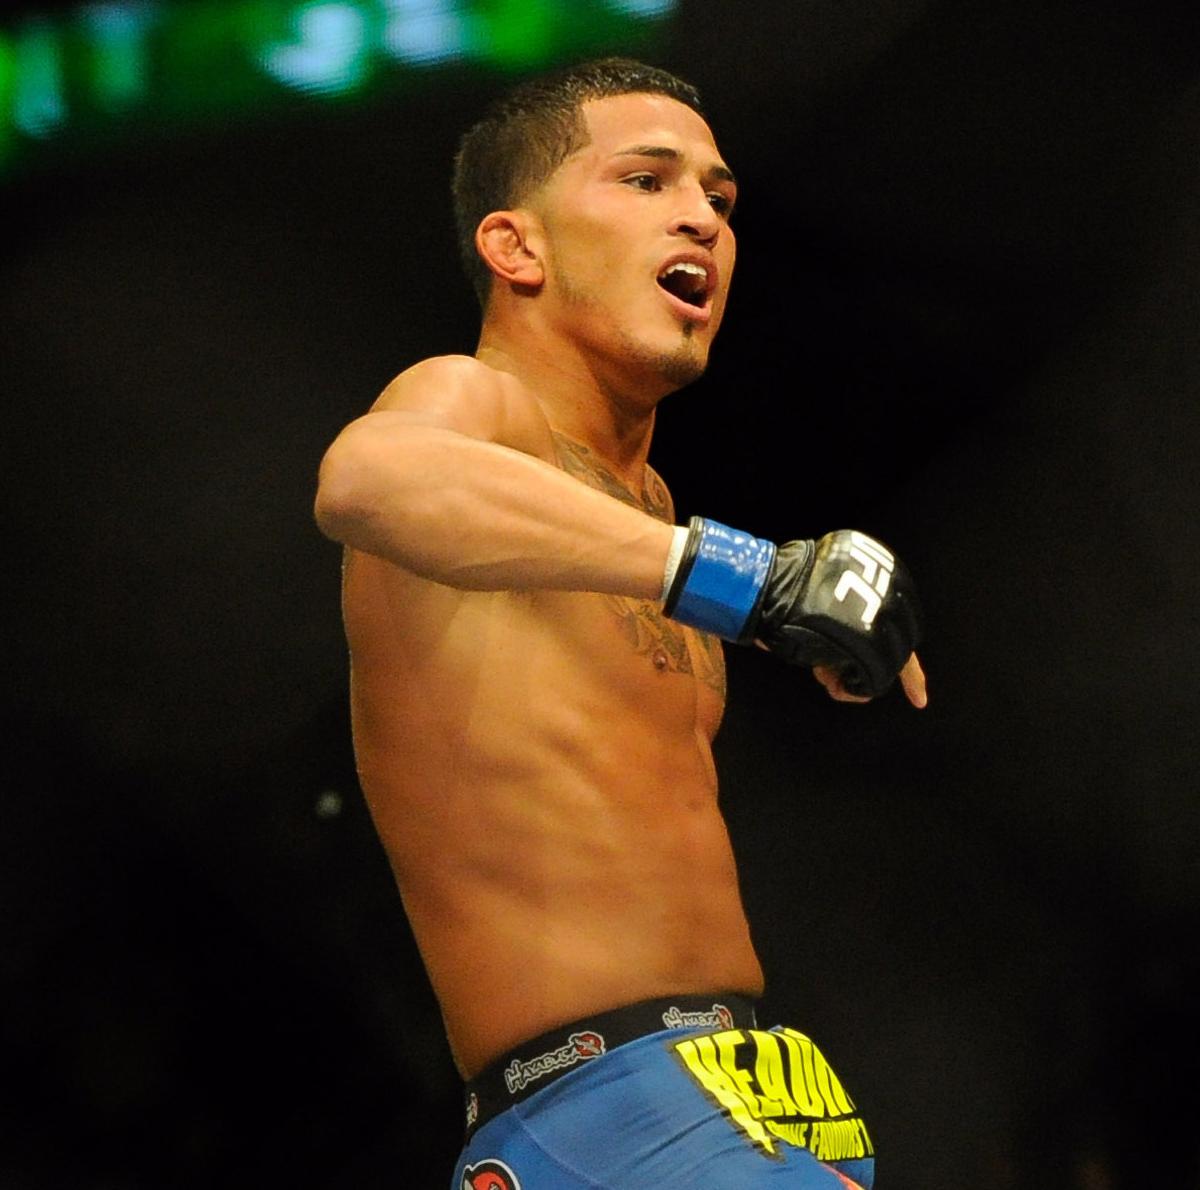 Anthony Pettis' Next Fight: Who Should the New Champ Face Next? | Bleacher Report ...